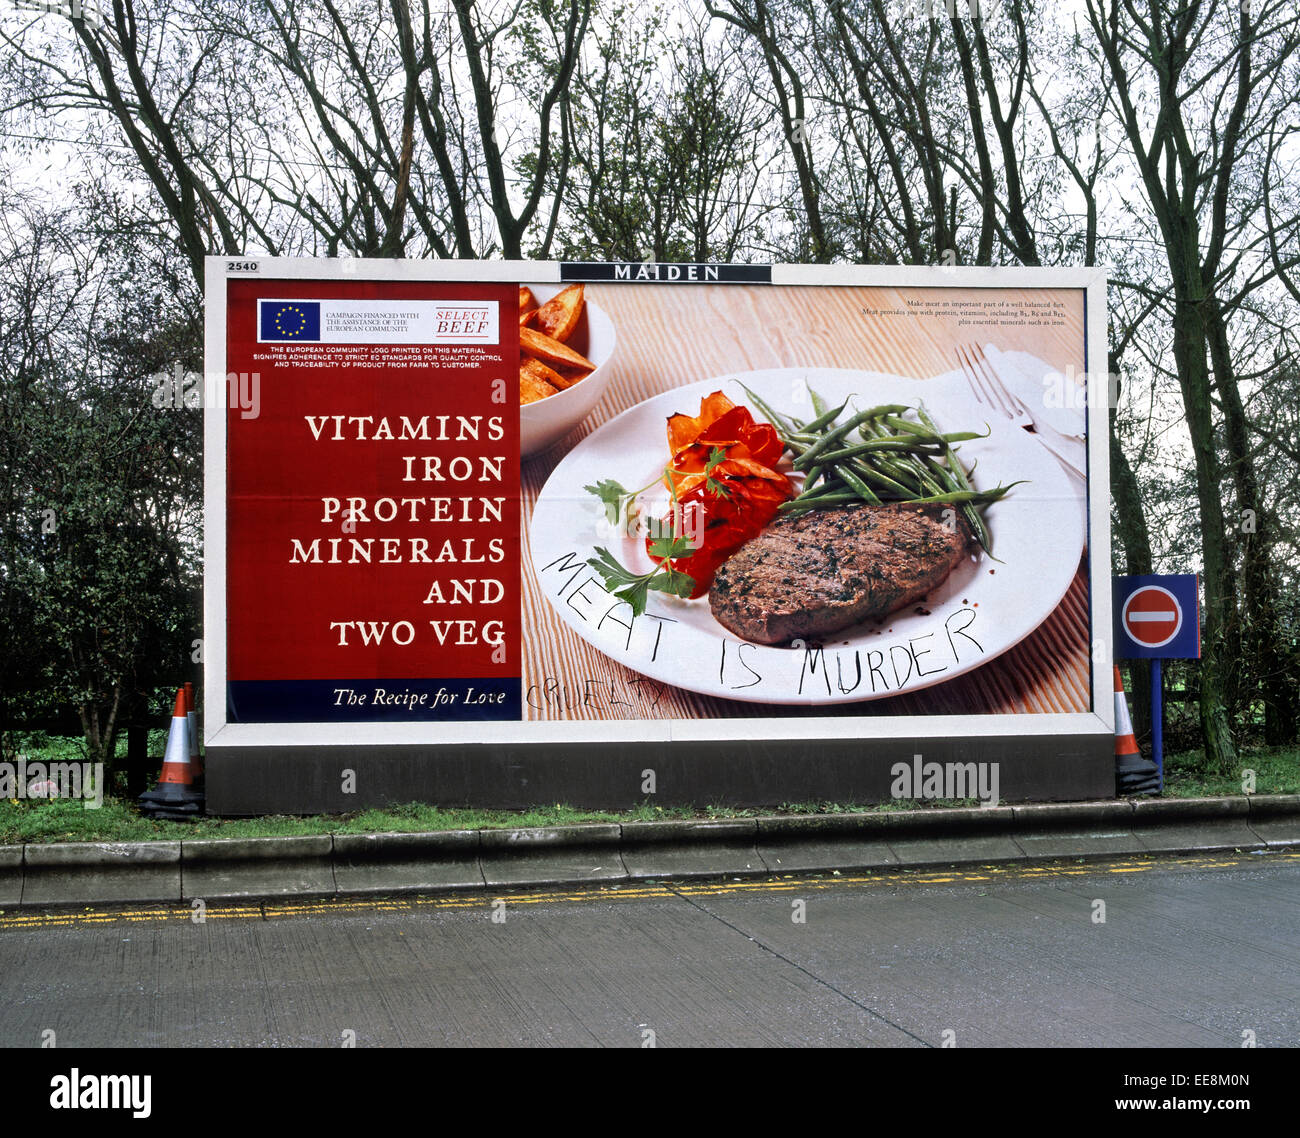 'Meat is Murder' - vegetarian/animal rights slogan written on a  poster advertising beef. Stock Photo